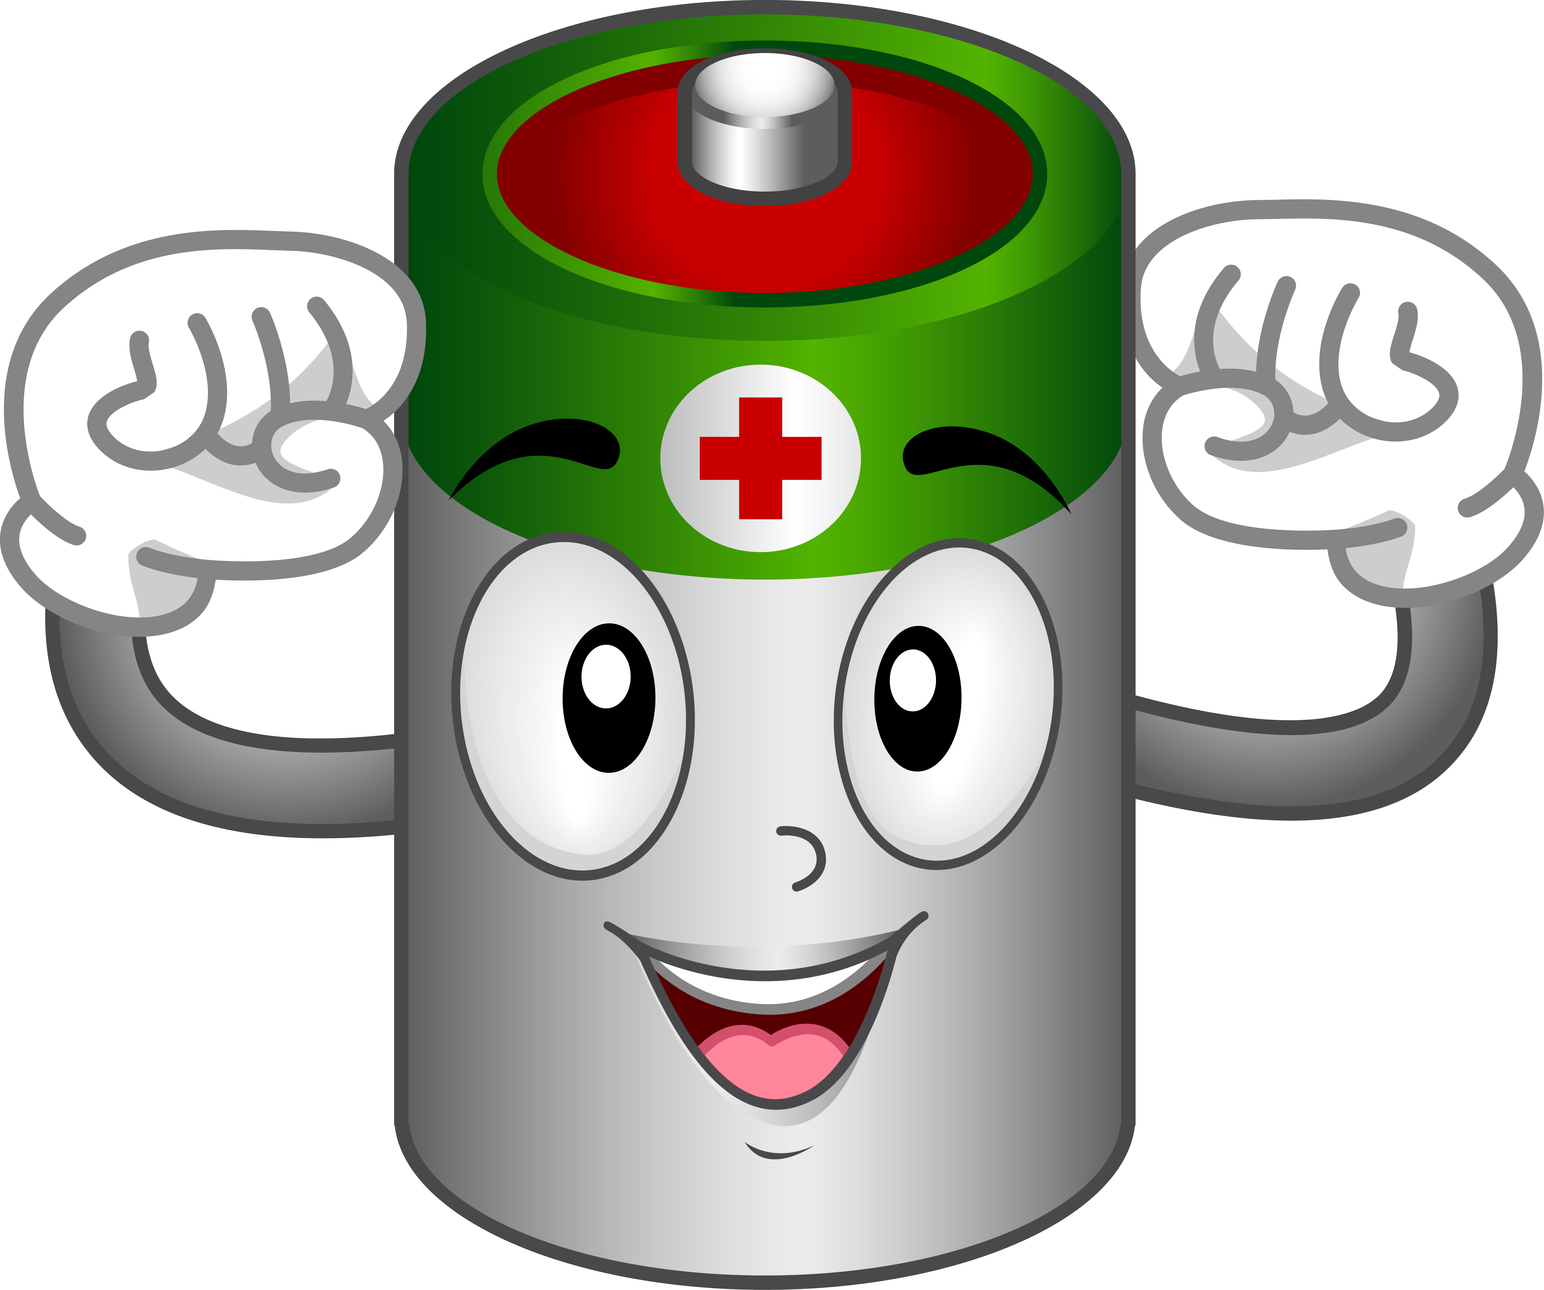 Battery clip art download. Battery cliparts